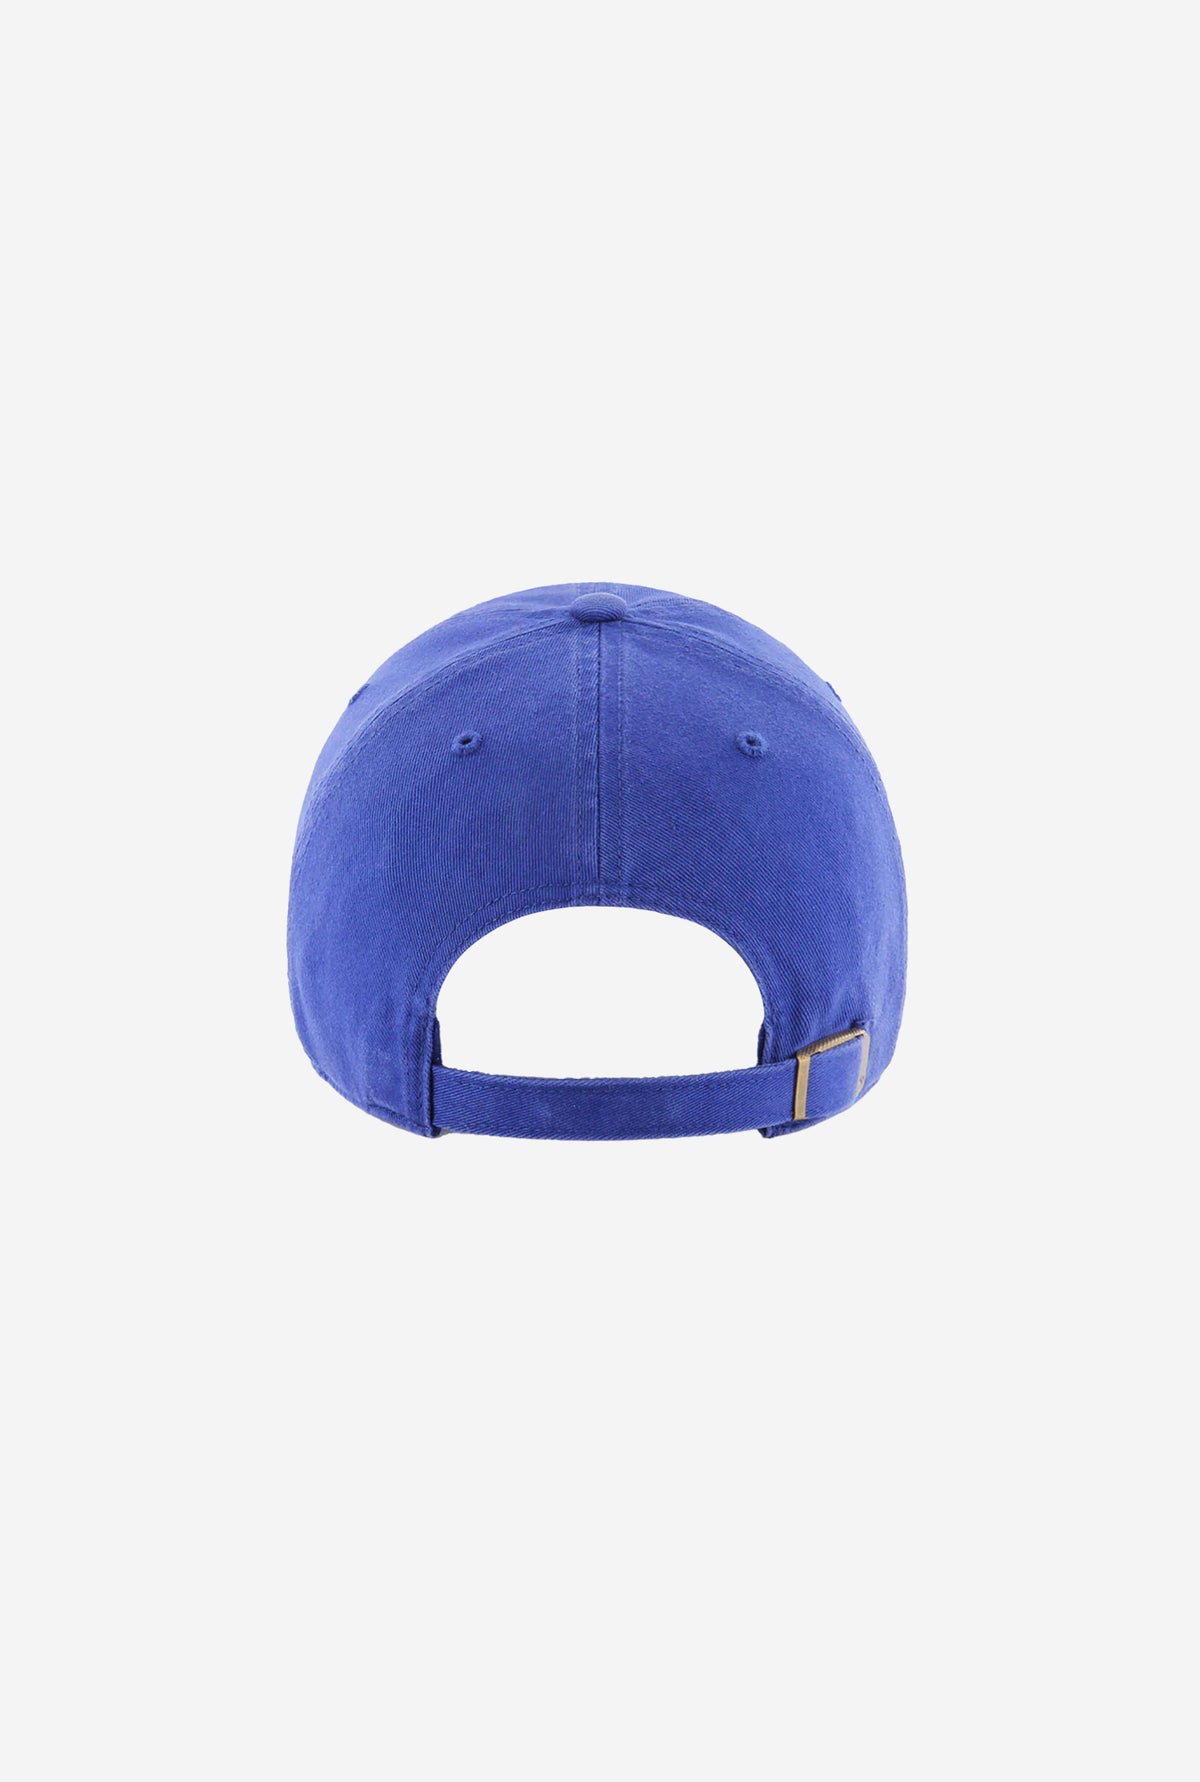 Montreal Expos Clean Up Cap